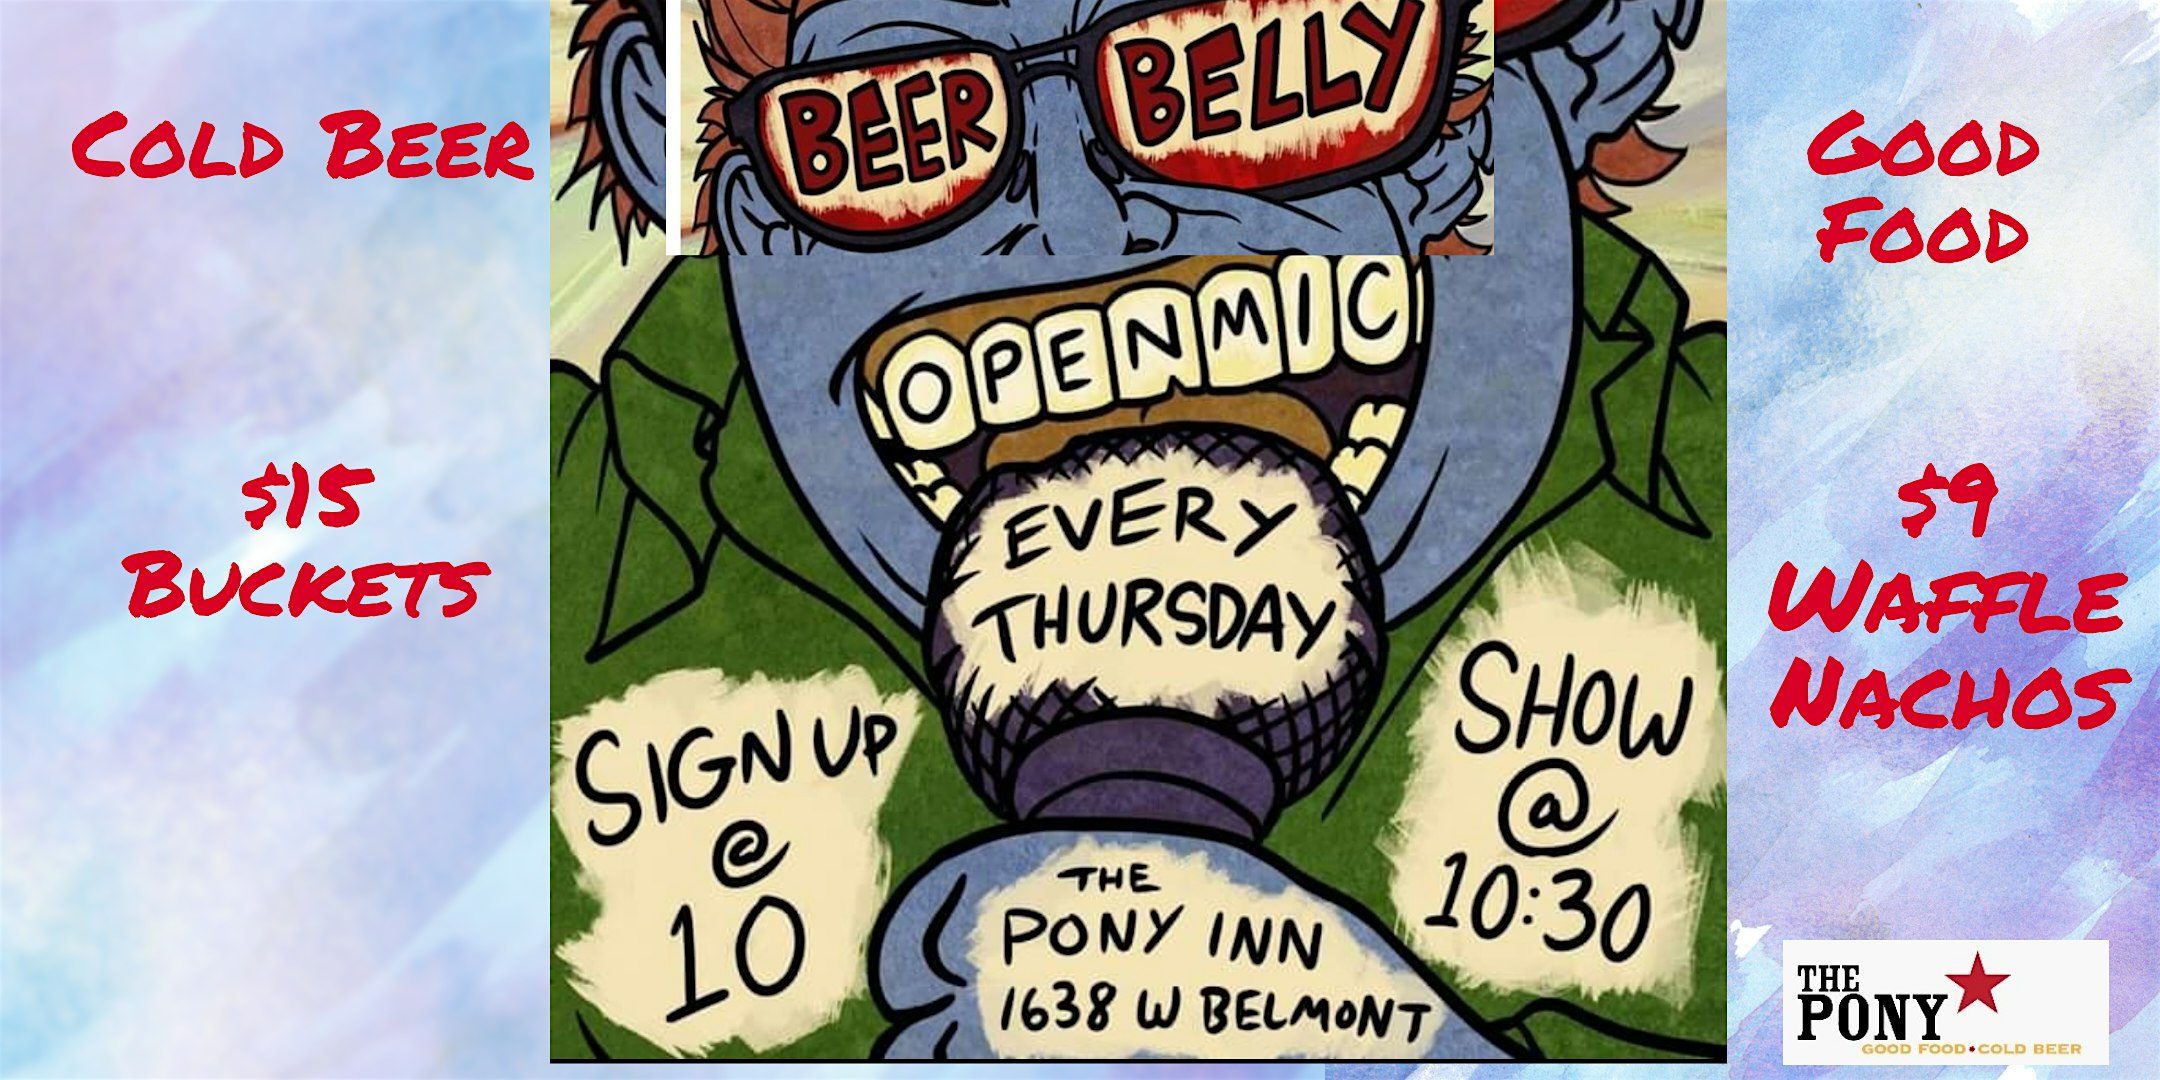 BEER BELLY COMEDY OPEN MIC AT THE PONY